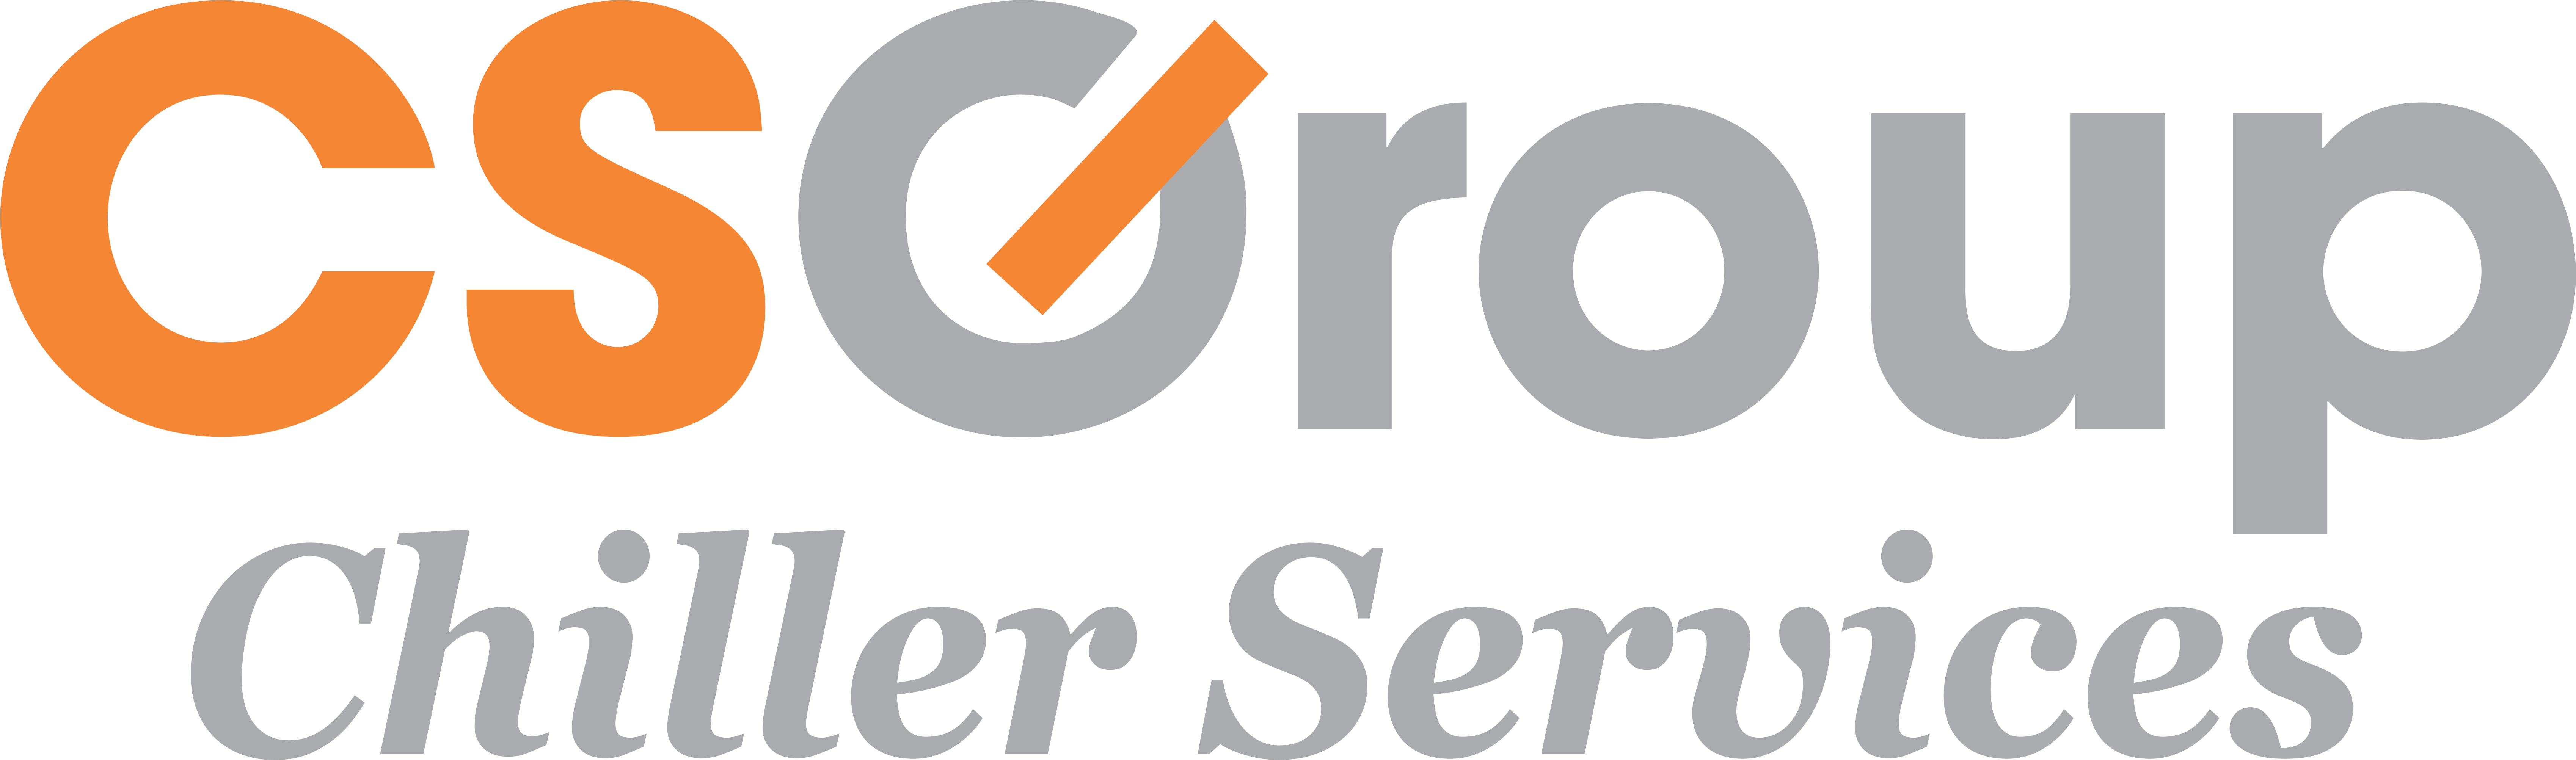 Logo with orange and gray text that reads "CS Group Chiller Services"